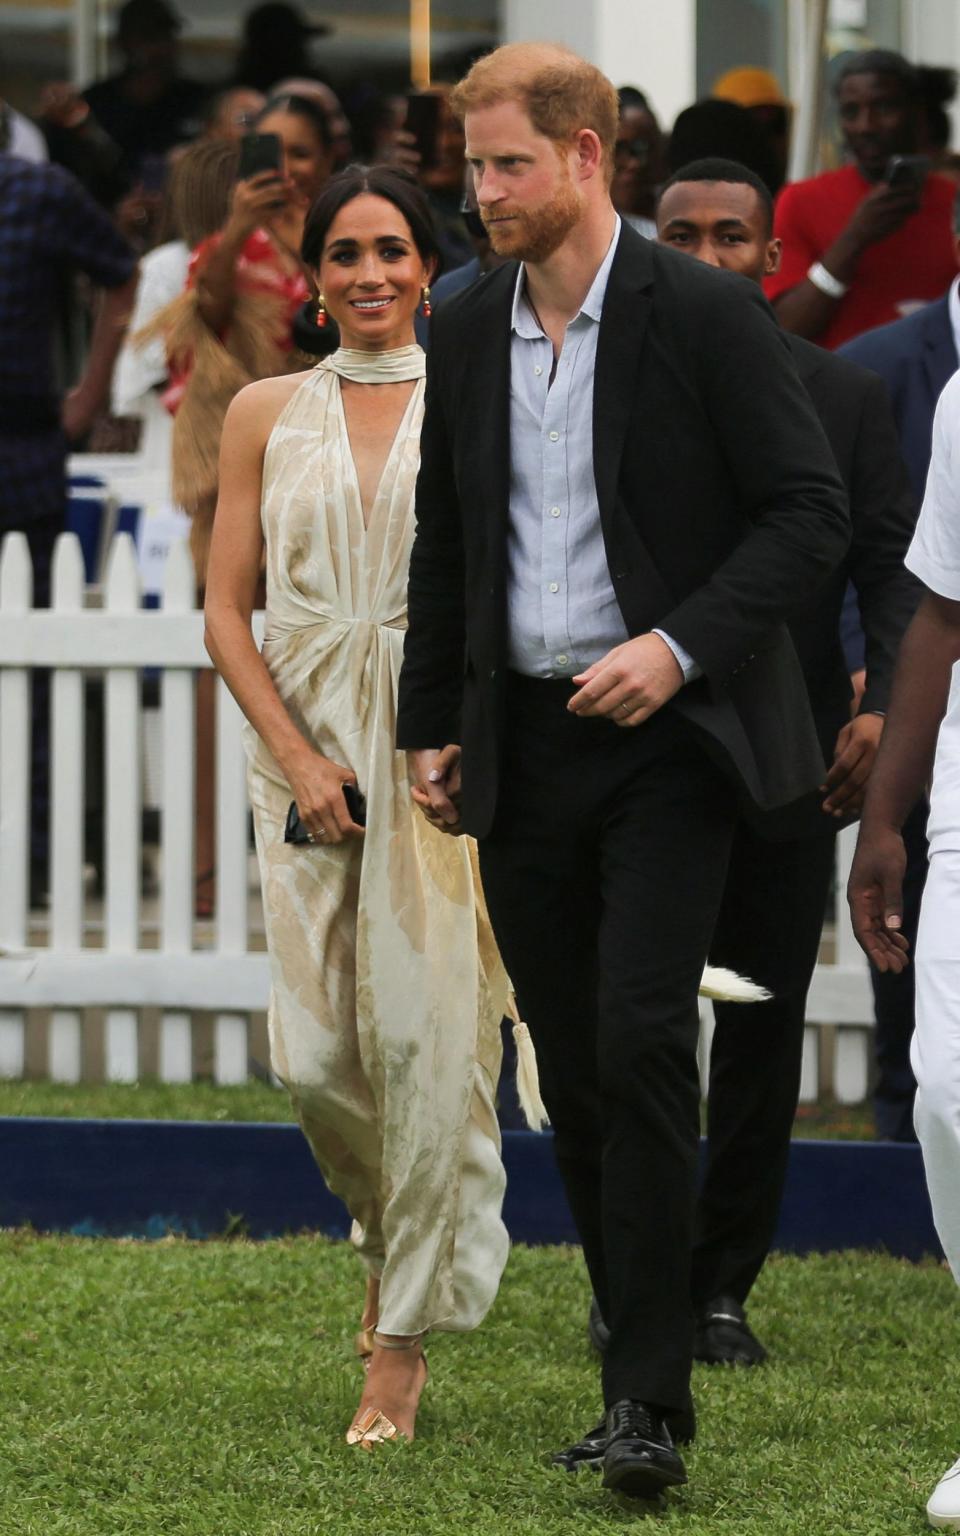 The Duchess in another dress by  Colombian designer Johanna Ortiz